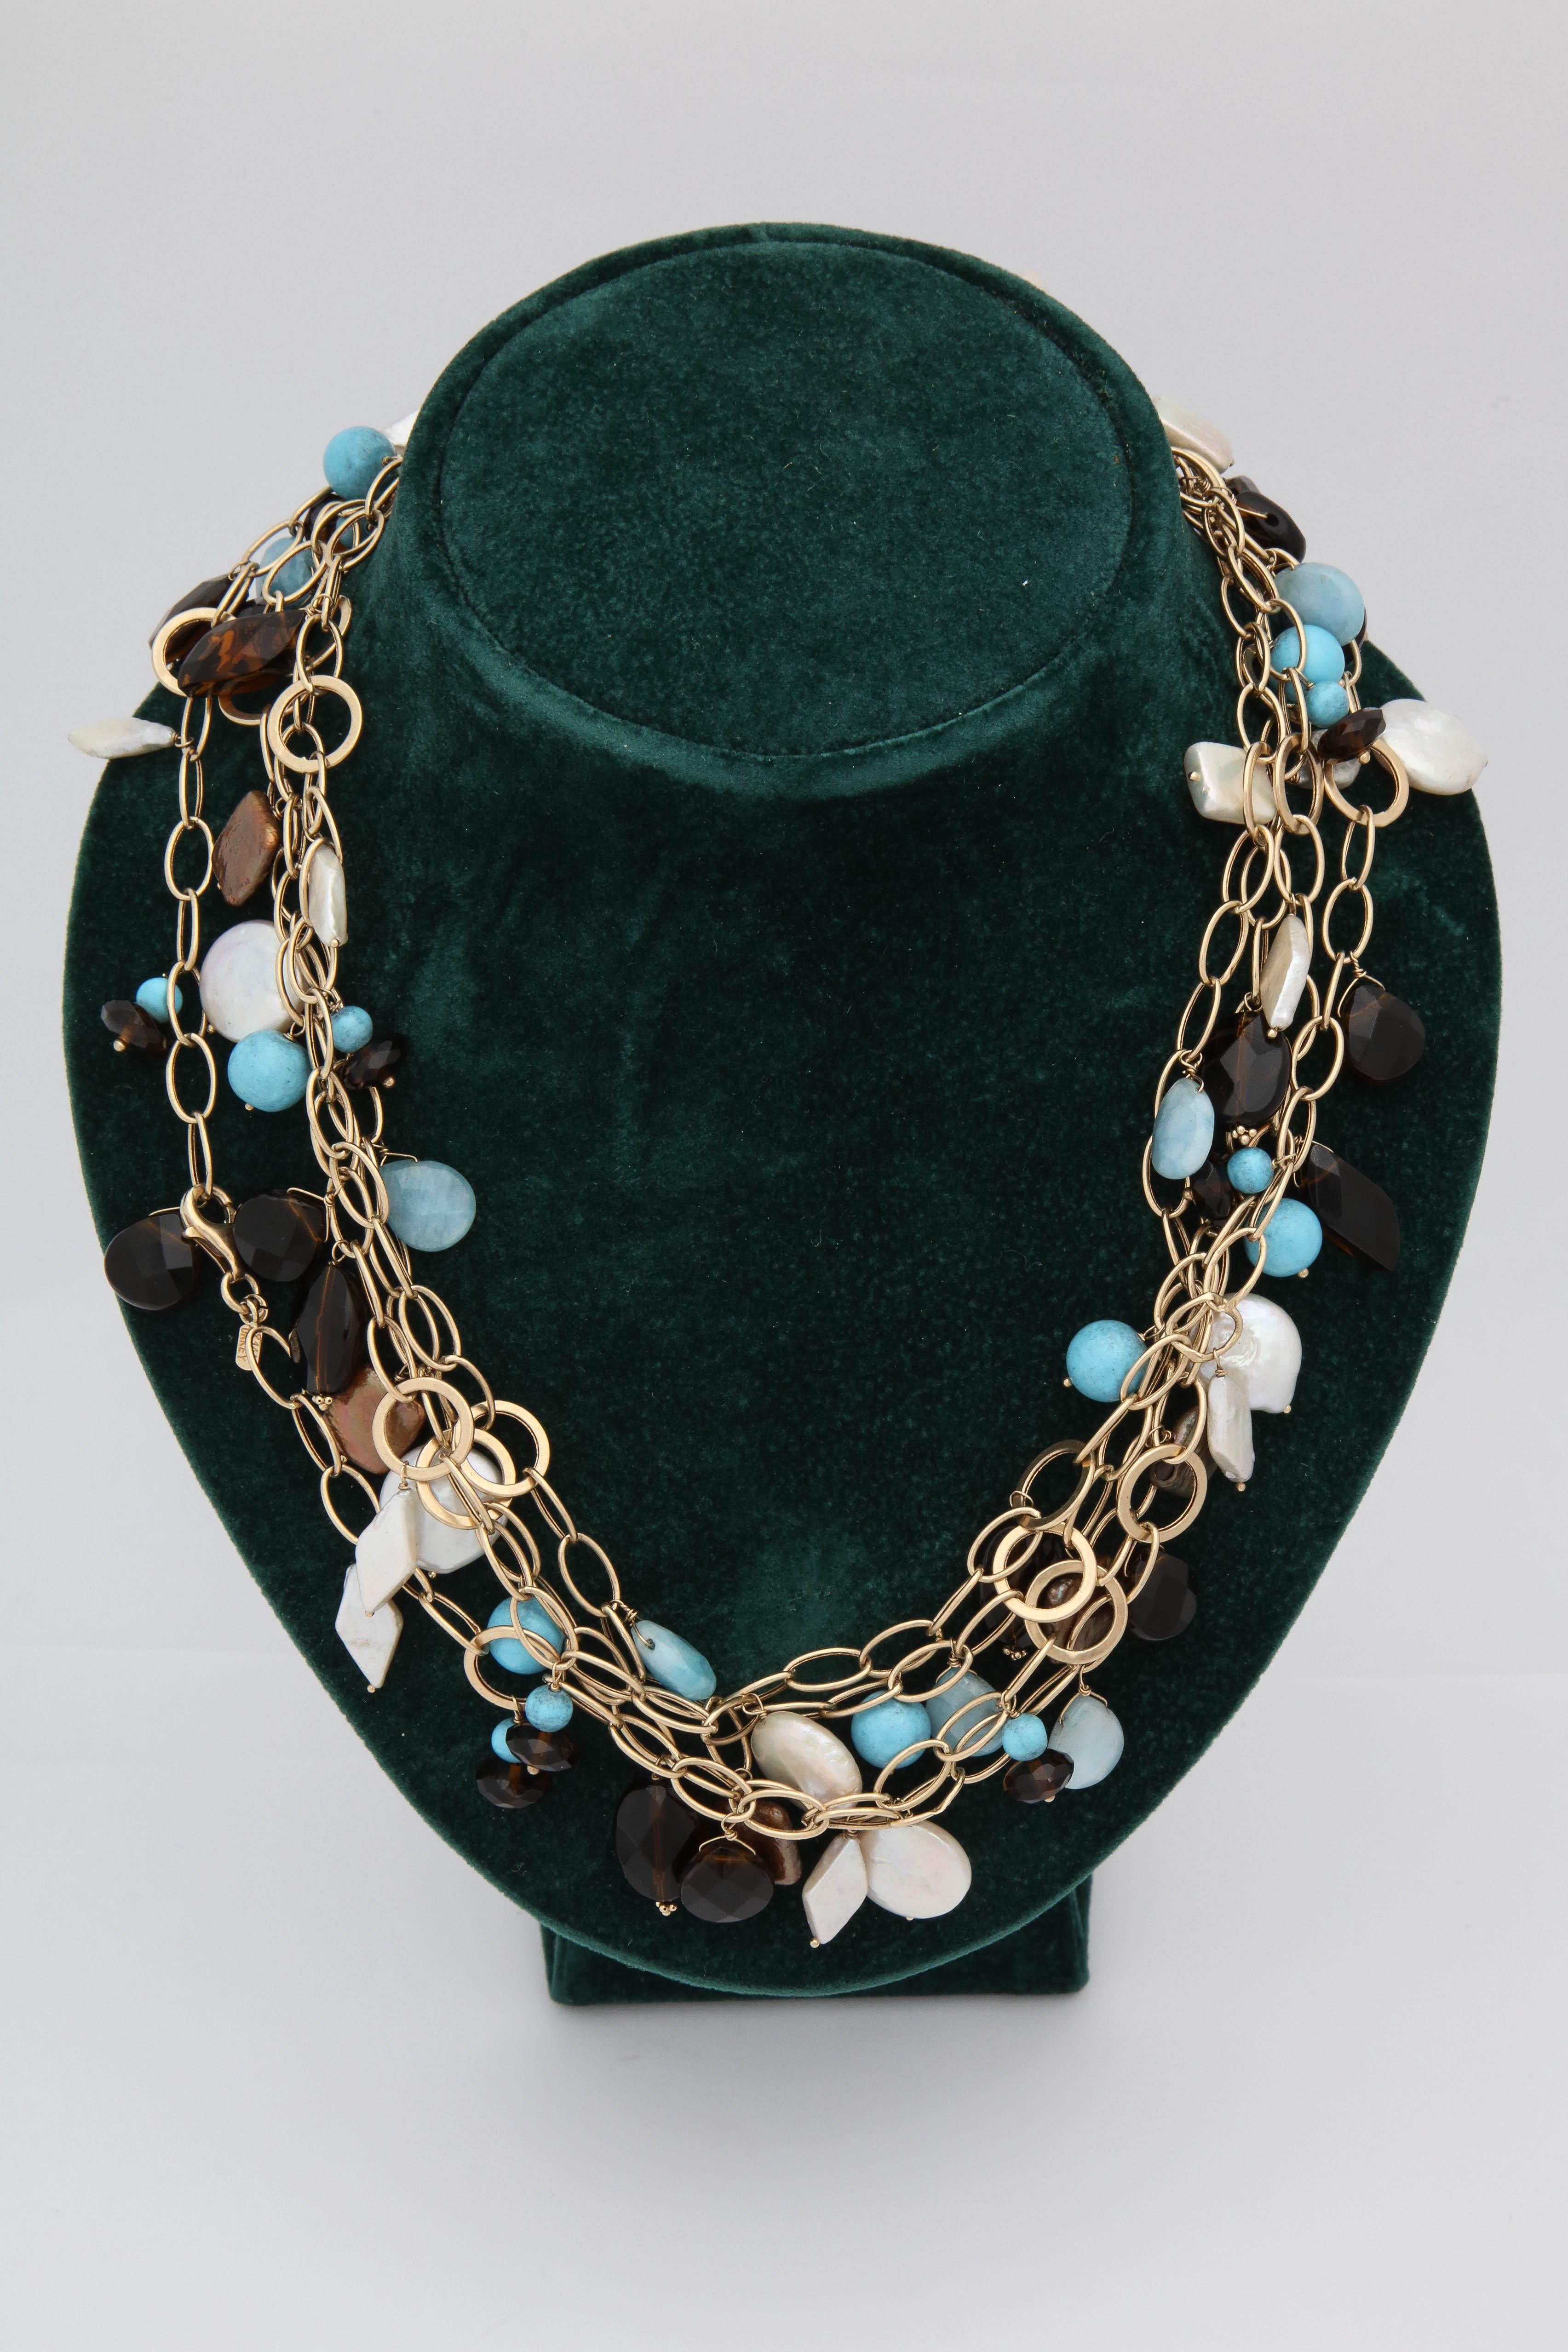 One Ladies 14kt Yellow Gold Extra Long Very Interesting Link Chain Necklace Designed With Numerous Turquoise Pieces And Also Designed With Tear Drop Shaped Raw Aquamarine Stones.Further Created With Numerous Faceted Different Shaped Citrine Stones